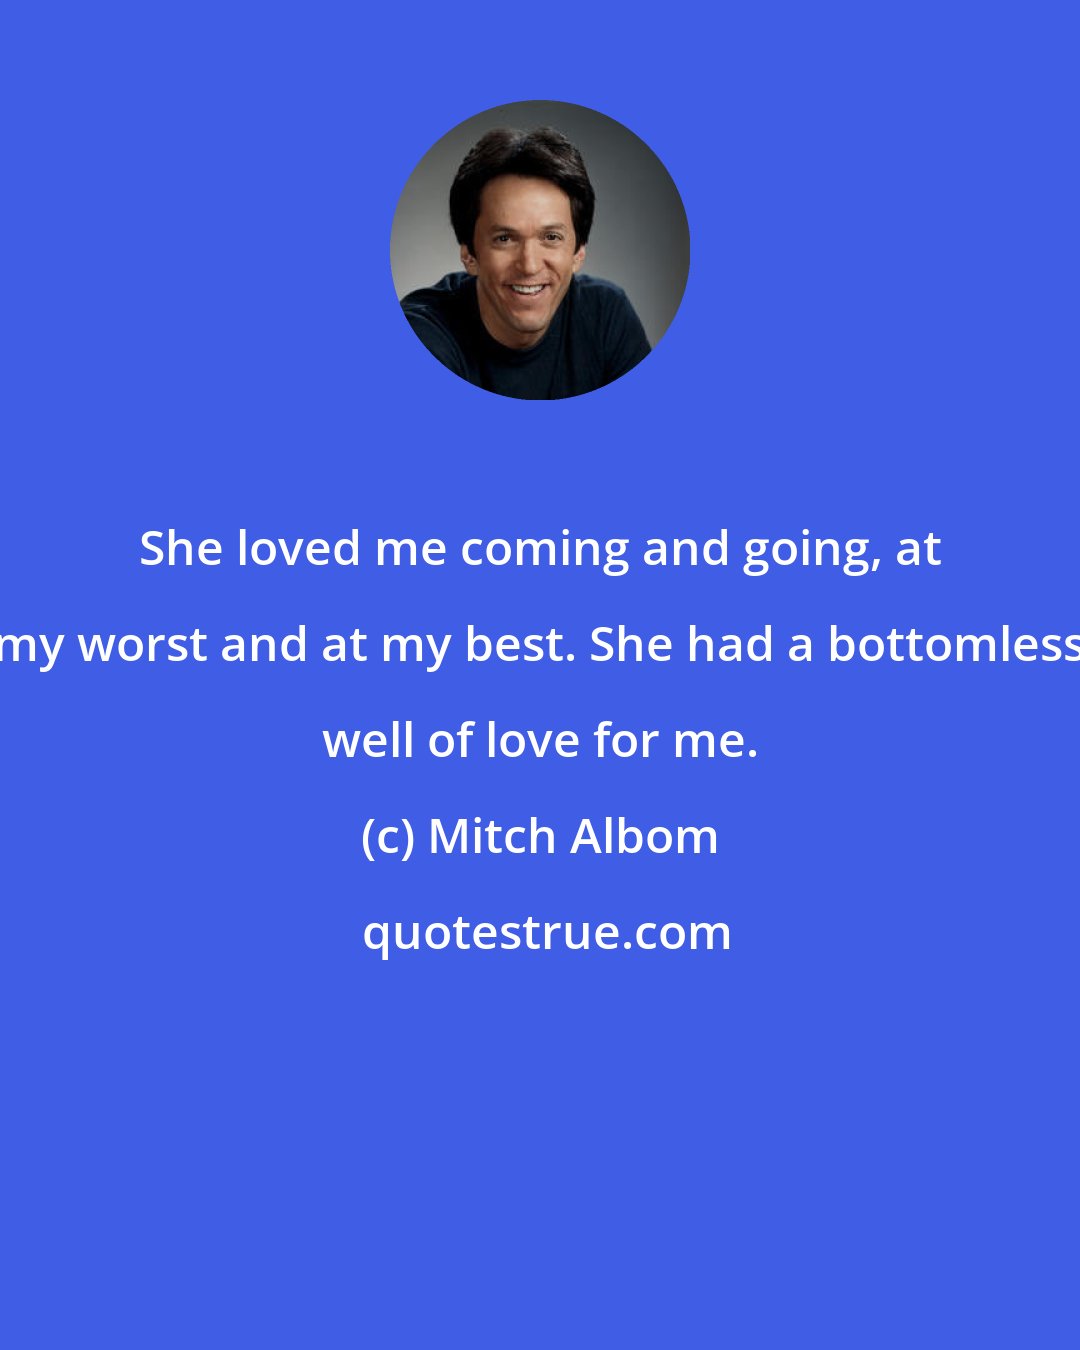 Mitch Albom: She loved me coming and going, at my worst and at my best. She had a bottomless well of love for me.